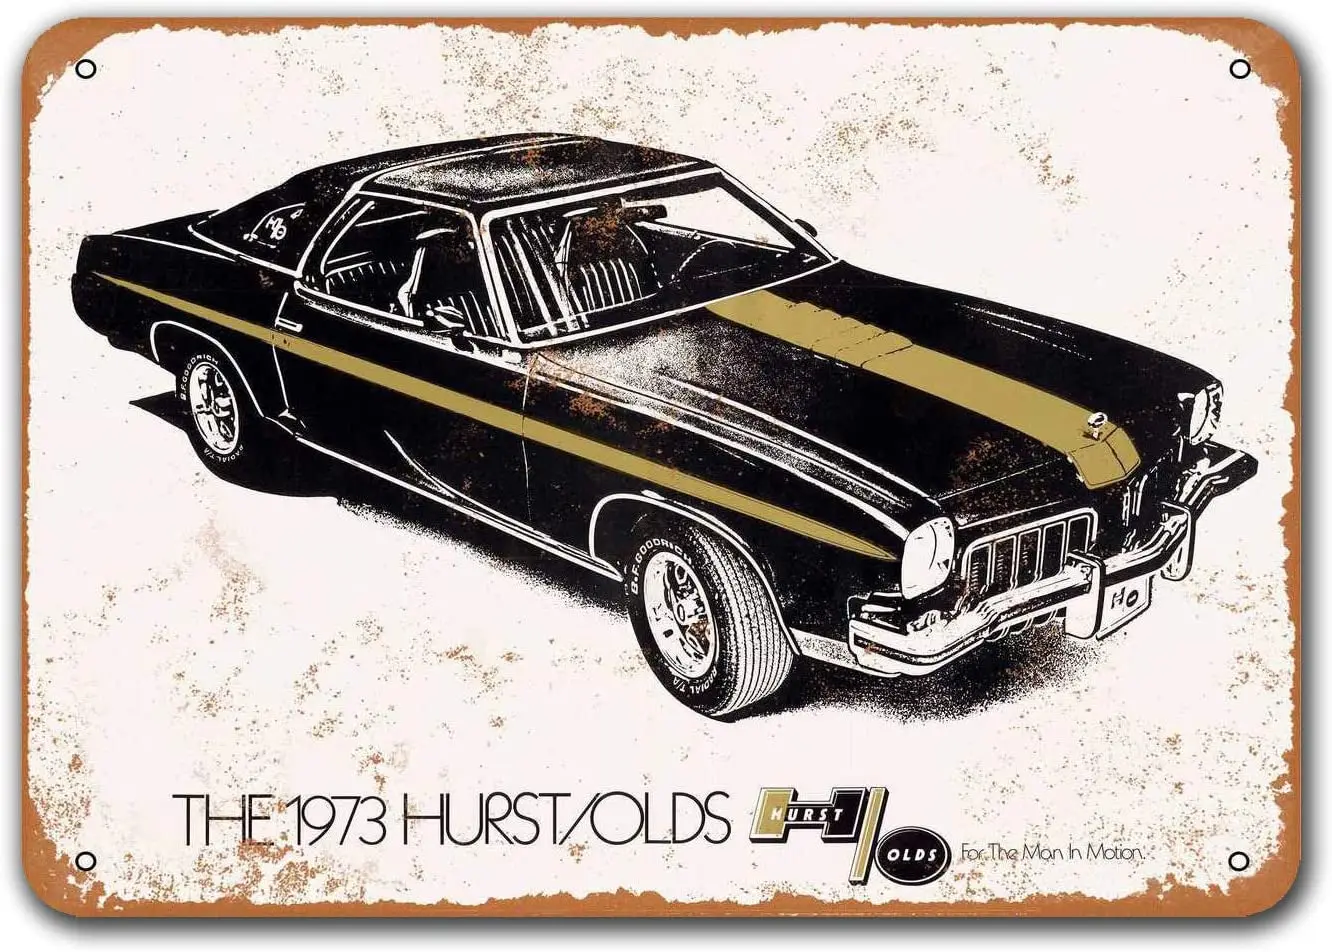 

Game Room 1973 Hurst Olds Wall Decor Dorm Pub Vintage Car Tin Signs Metal Home Coffee Club Office Bar Poster 12x8 inches